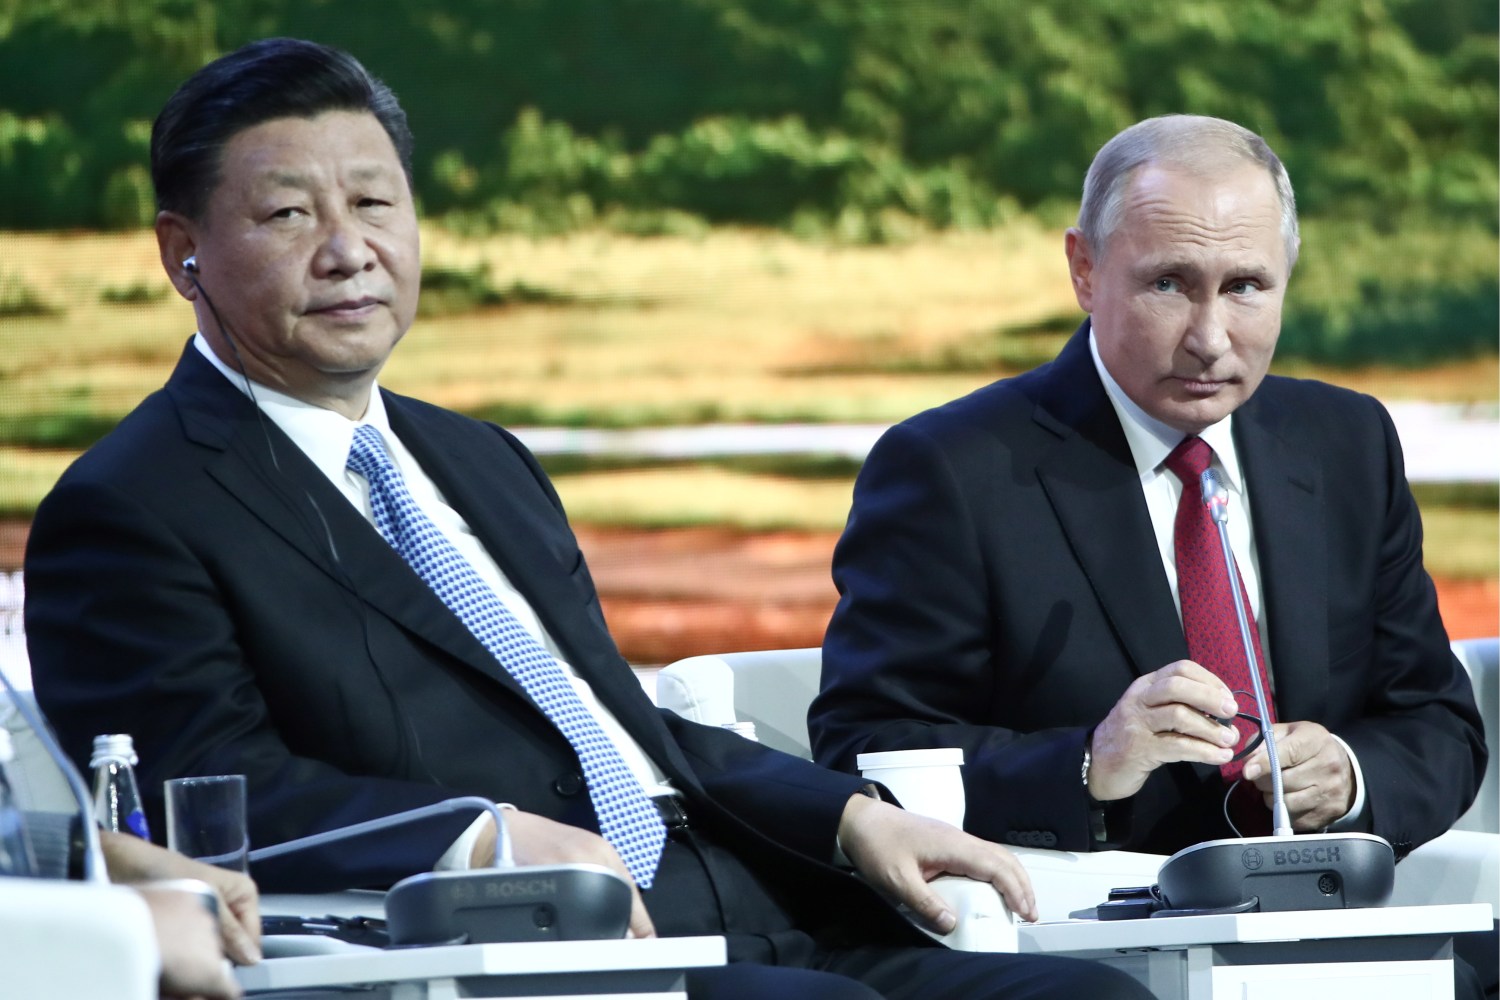 Russian President Vladimir Putin (R) and Chinese President Xi Jinping attend a session of the Eastern Economic Forum in Vladivostok, Russia September 12, 2018. Valery Sharifulin/TASS Host Photo Agency/Pool via REUTERS - RC16A745C5C0